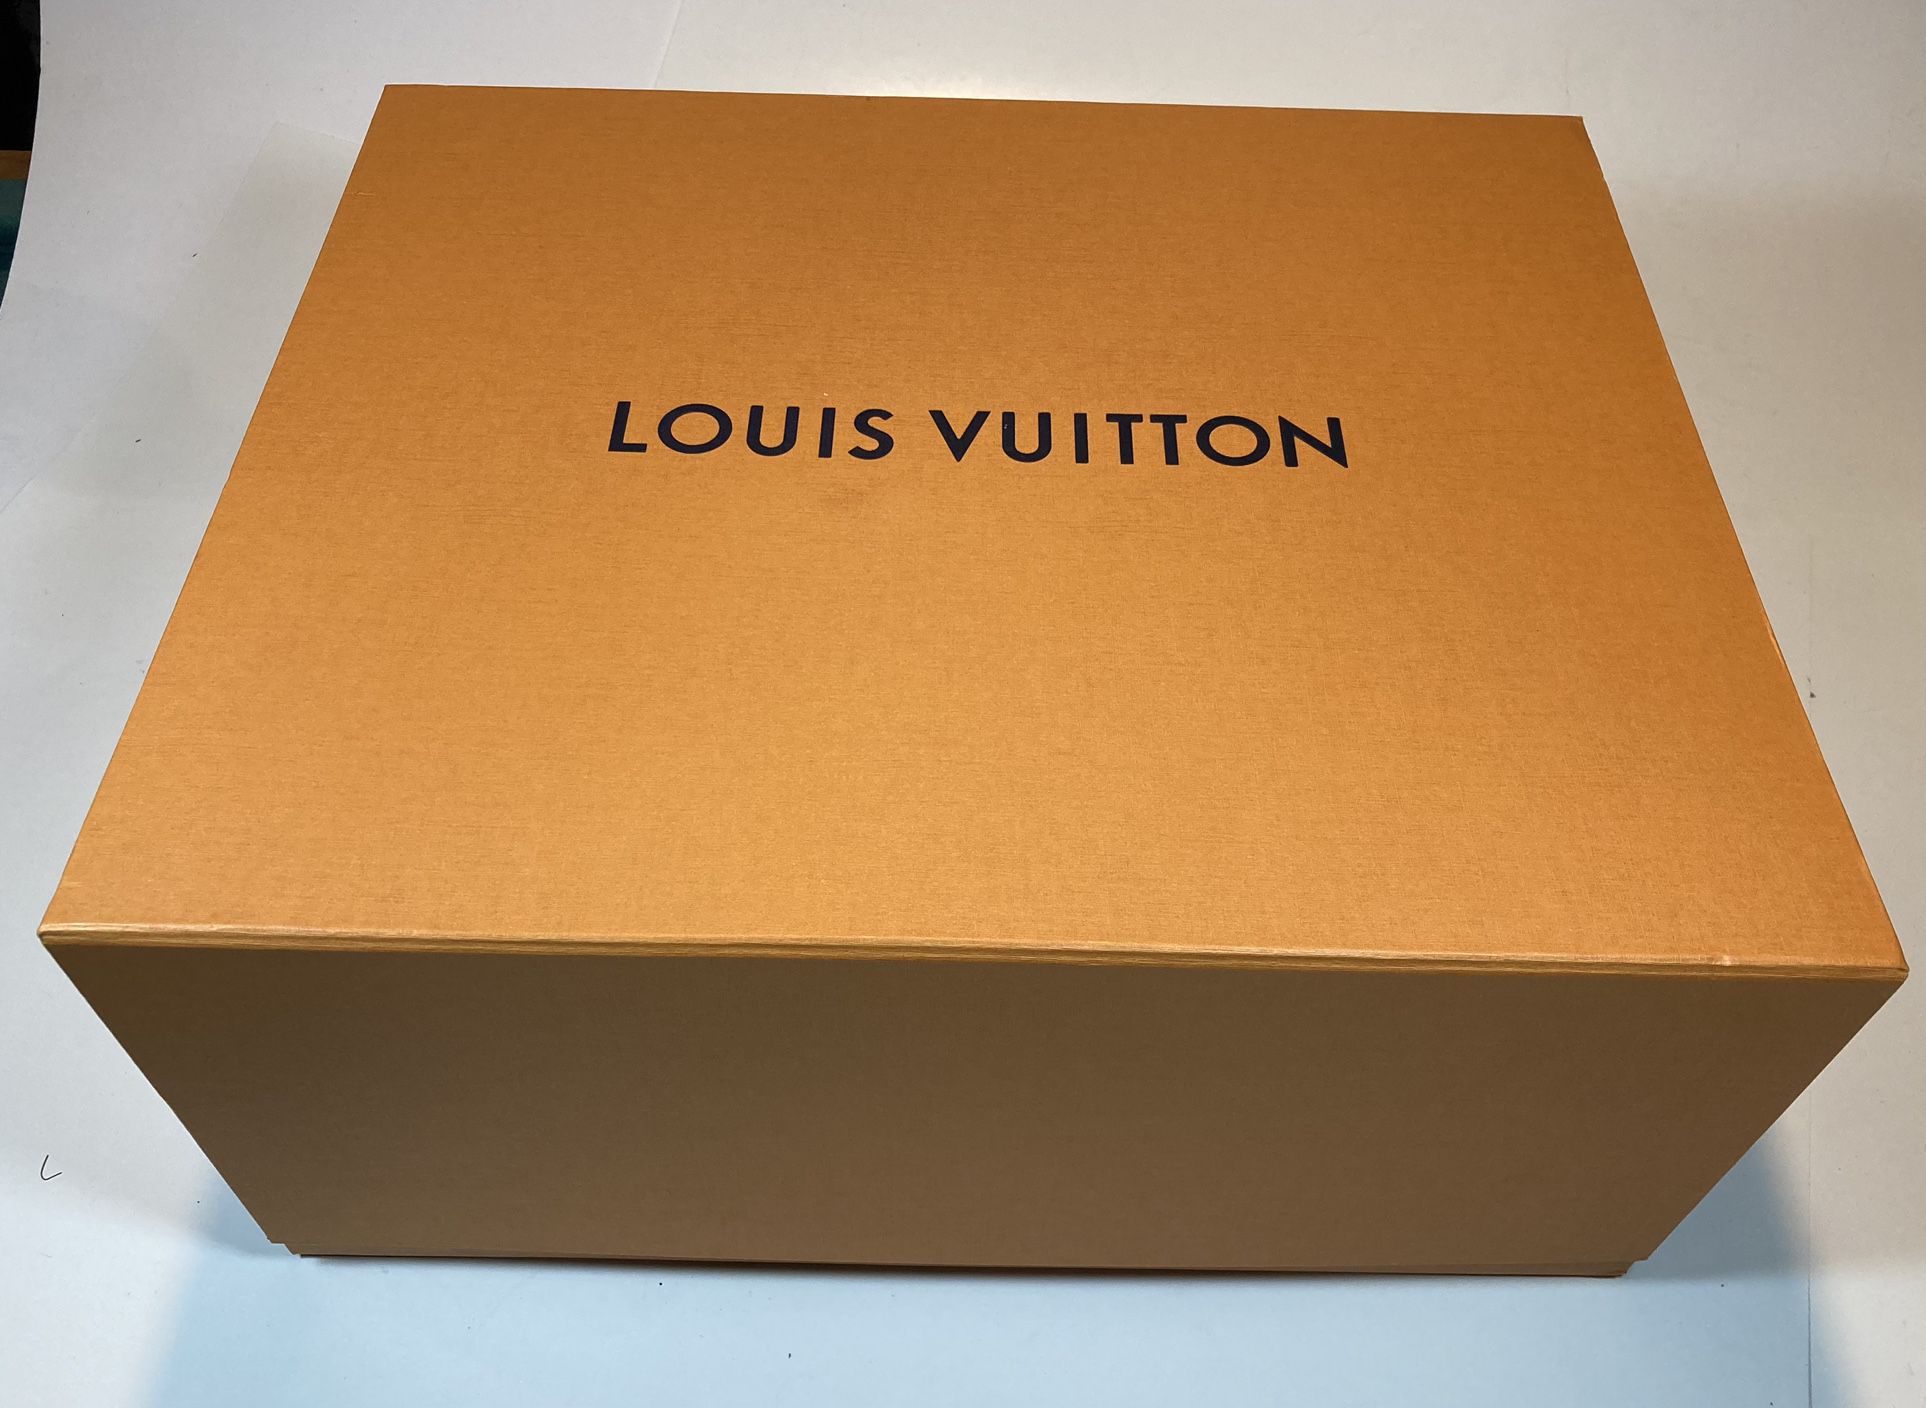 lv boxes for sale